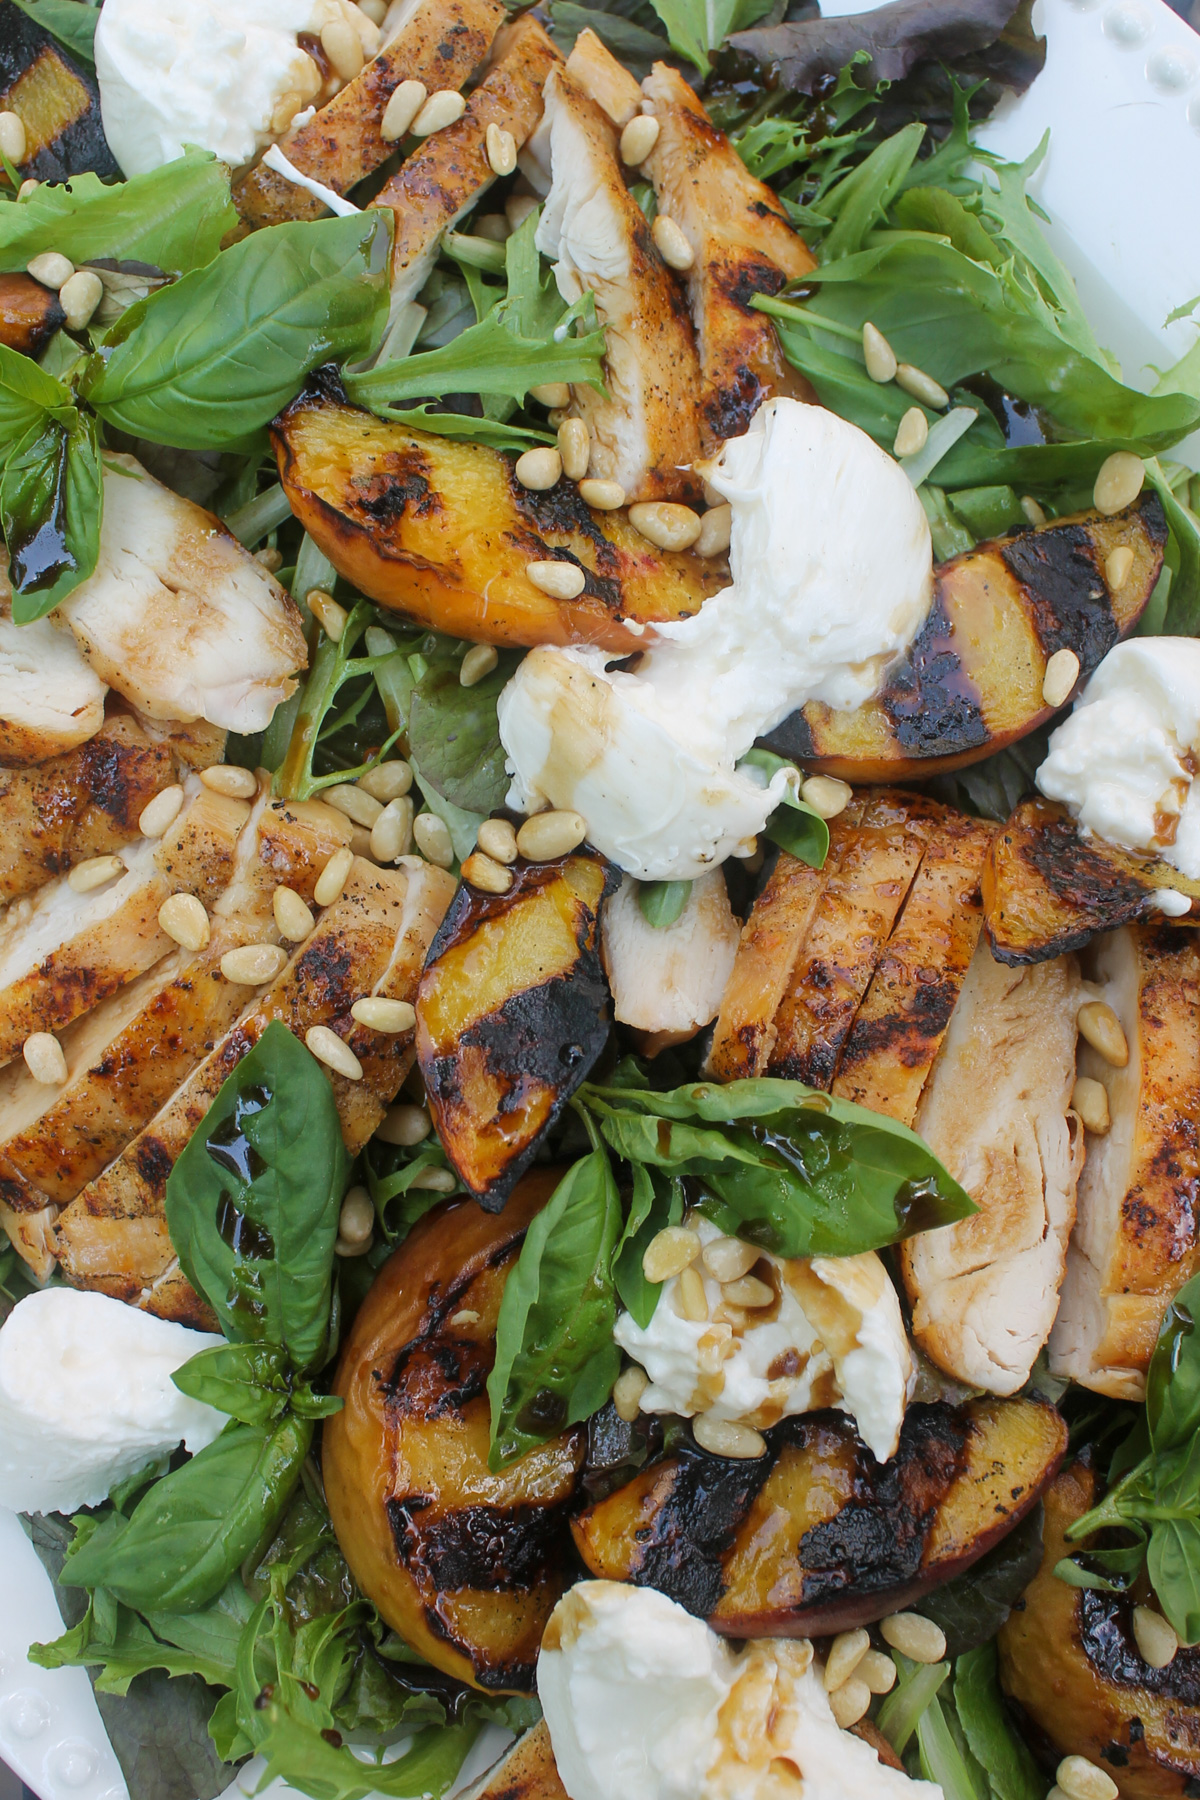 Grilled peach salad with honey balsamic vinaigrette.